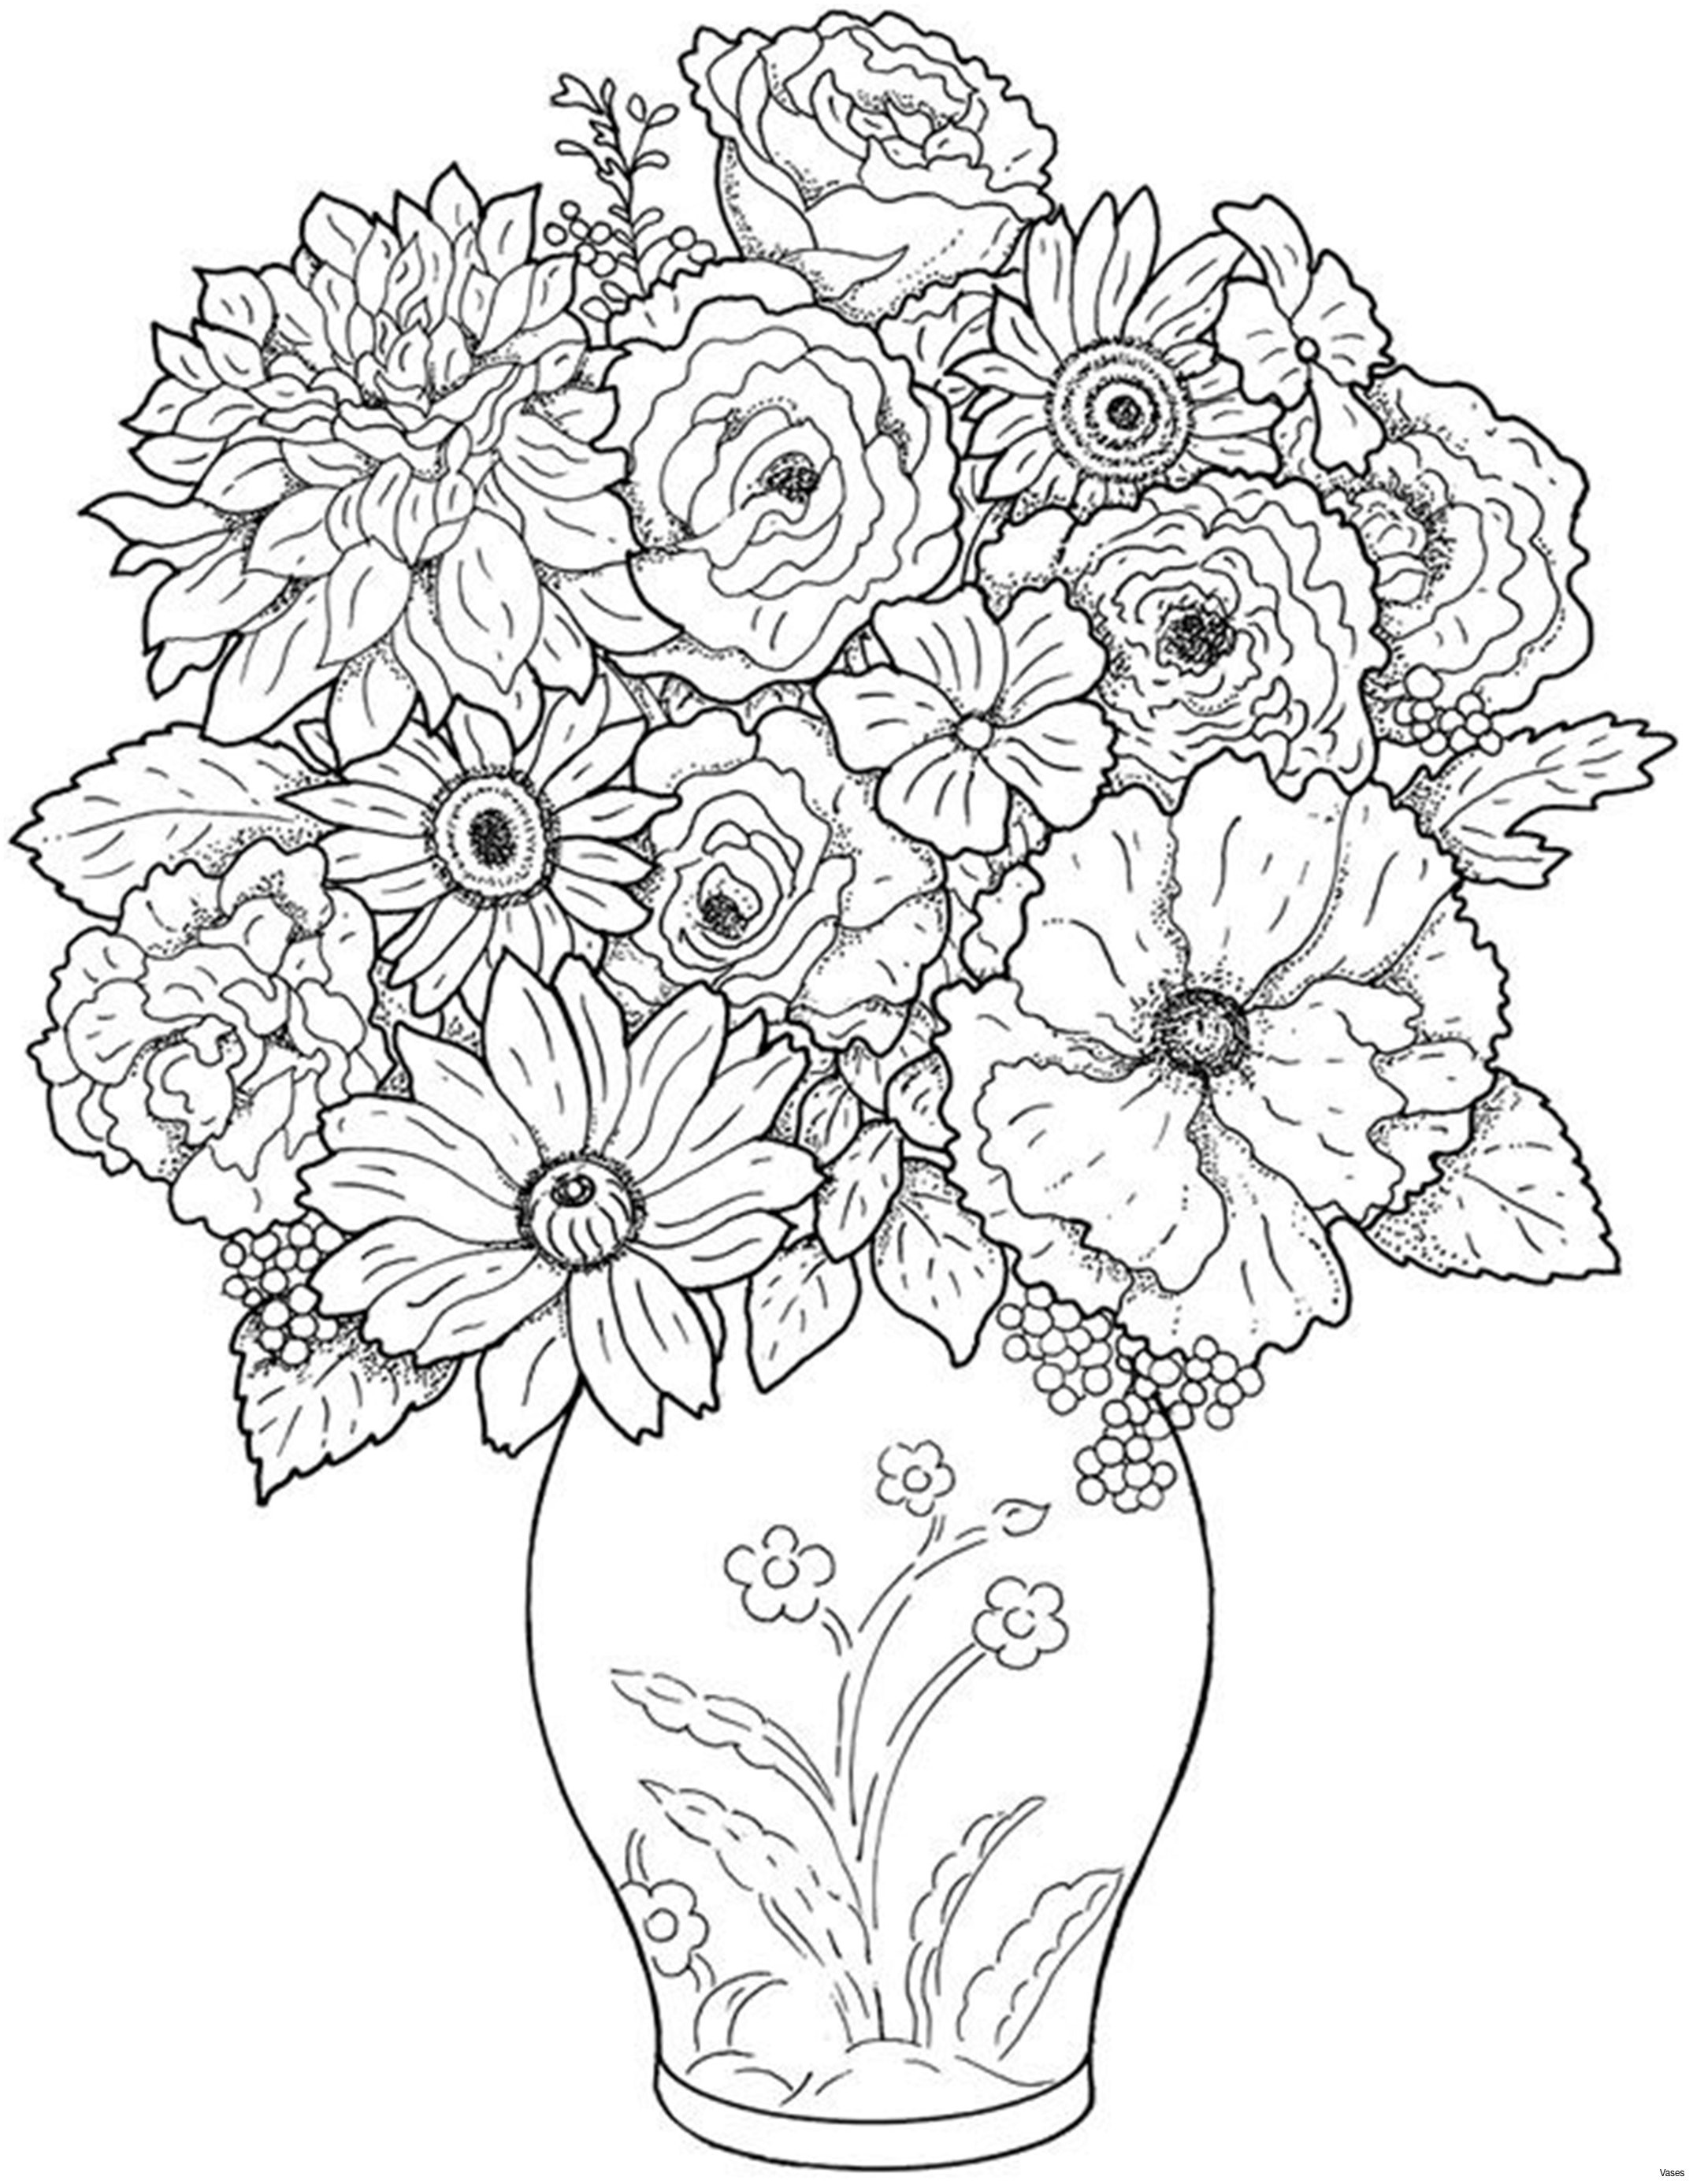 30 Lovable Teddy Bear Vase 2024 free download teddy bear vase of best of vases flower vase coloring page pages flowers in a top i 0d within best of vases flower vase coloring page pages flowers in a top i 0d care bears